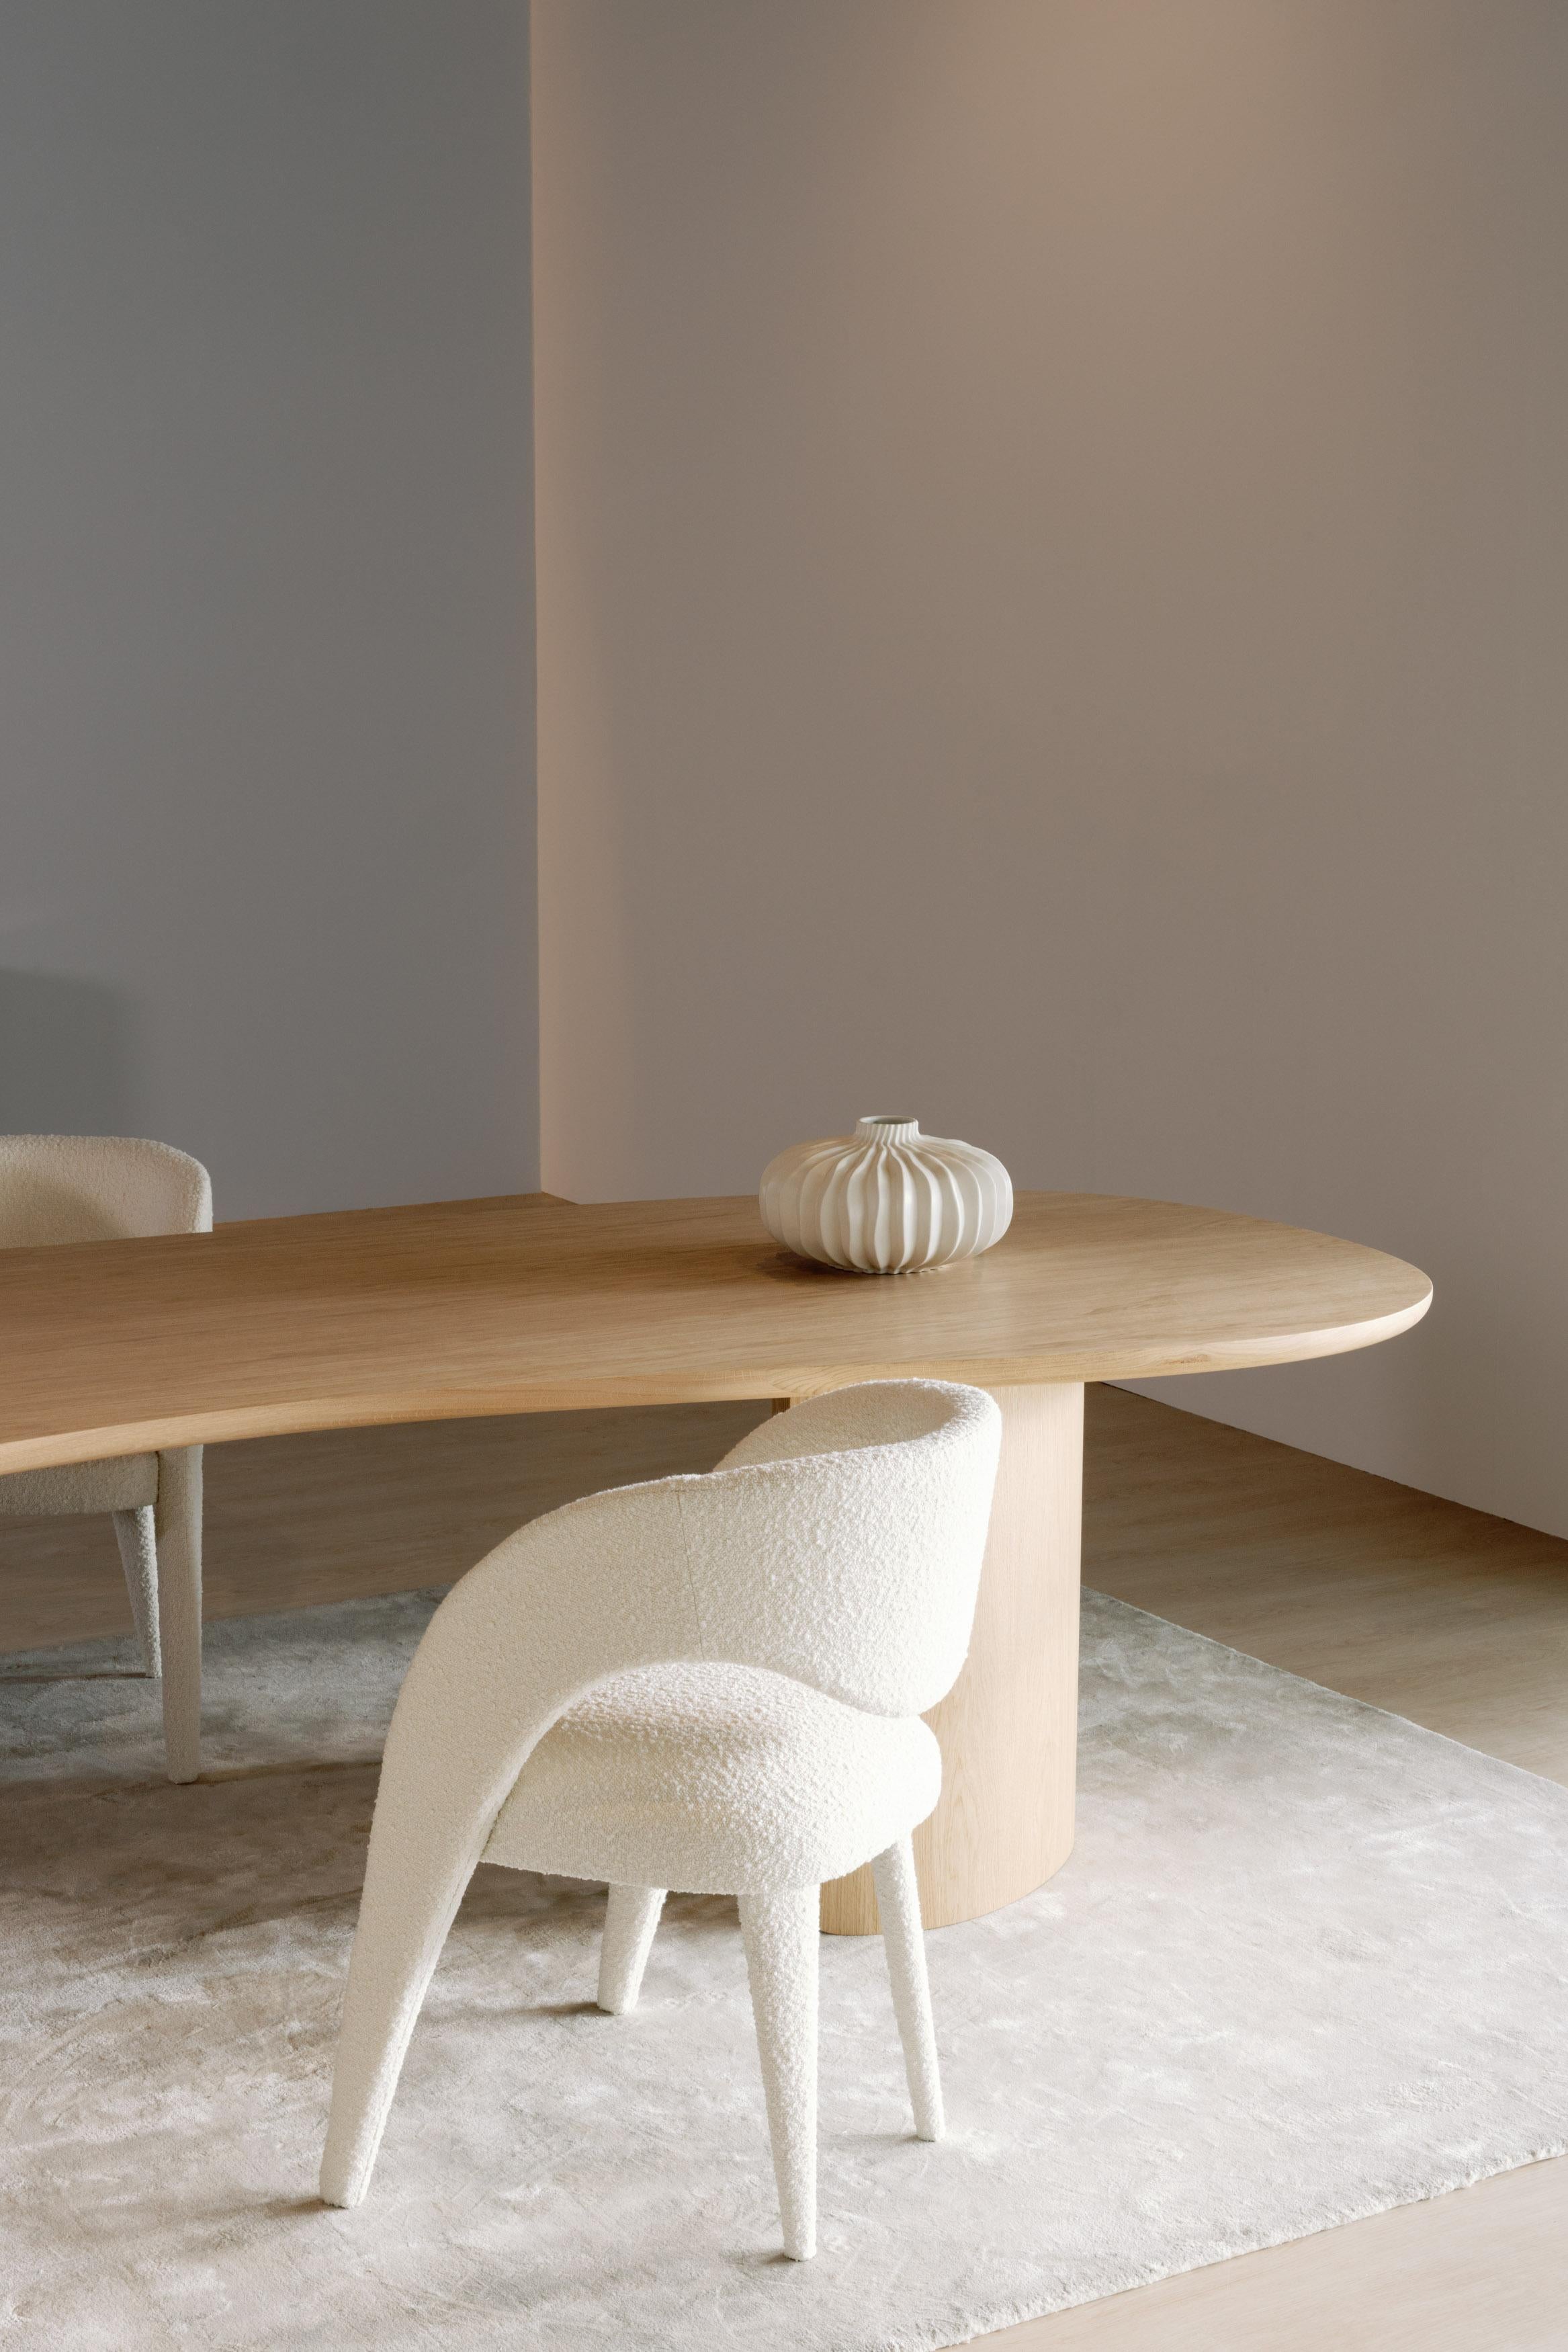 Laurence Chair, Contemporary Collection, Handcrafted in Portugal - Europe by Greenapple.

Designed by Rute Martins for the Contemporary Collection, the Laurence dining chair was created with the artistic intent of reimagining the image of women